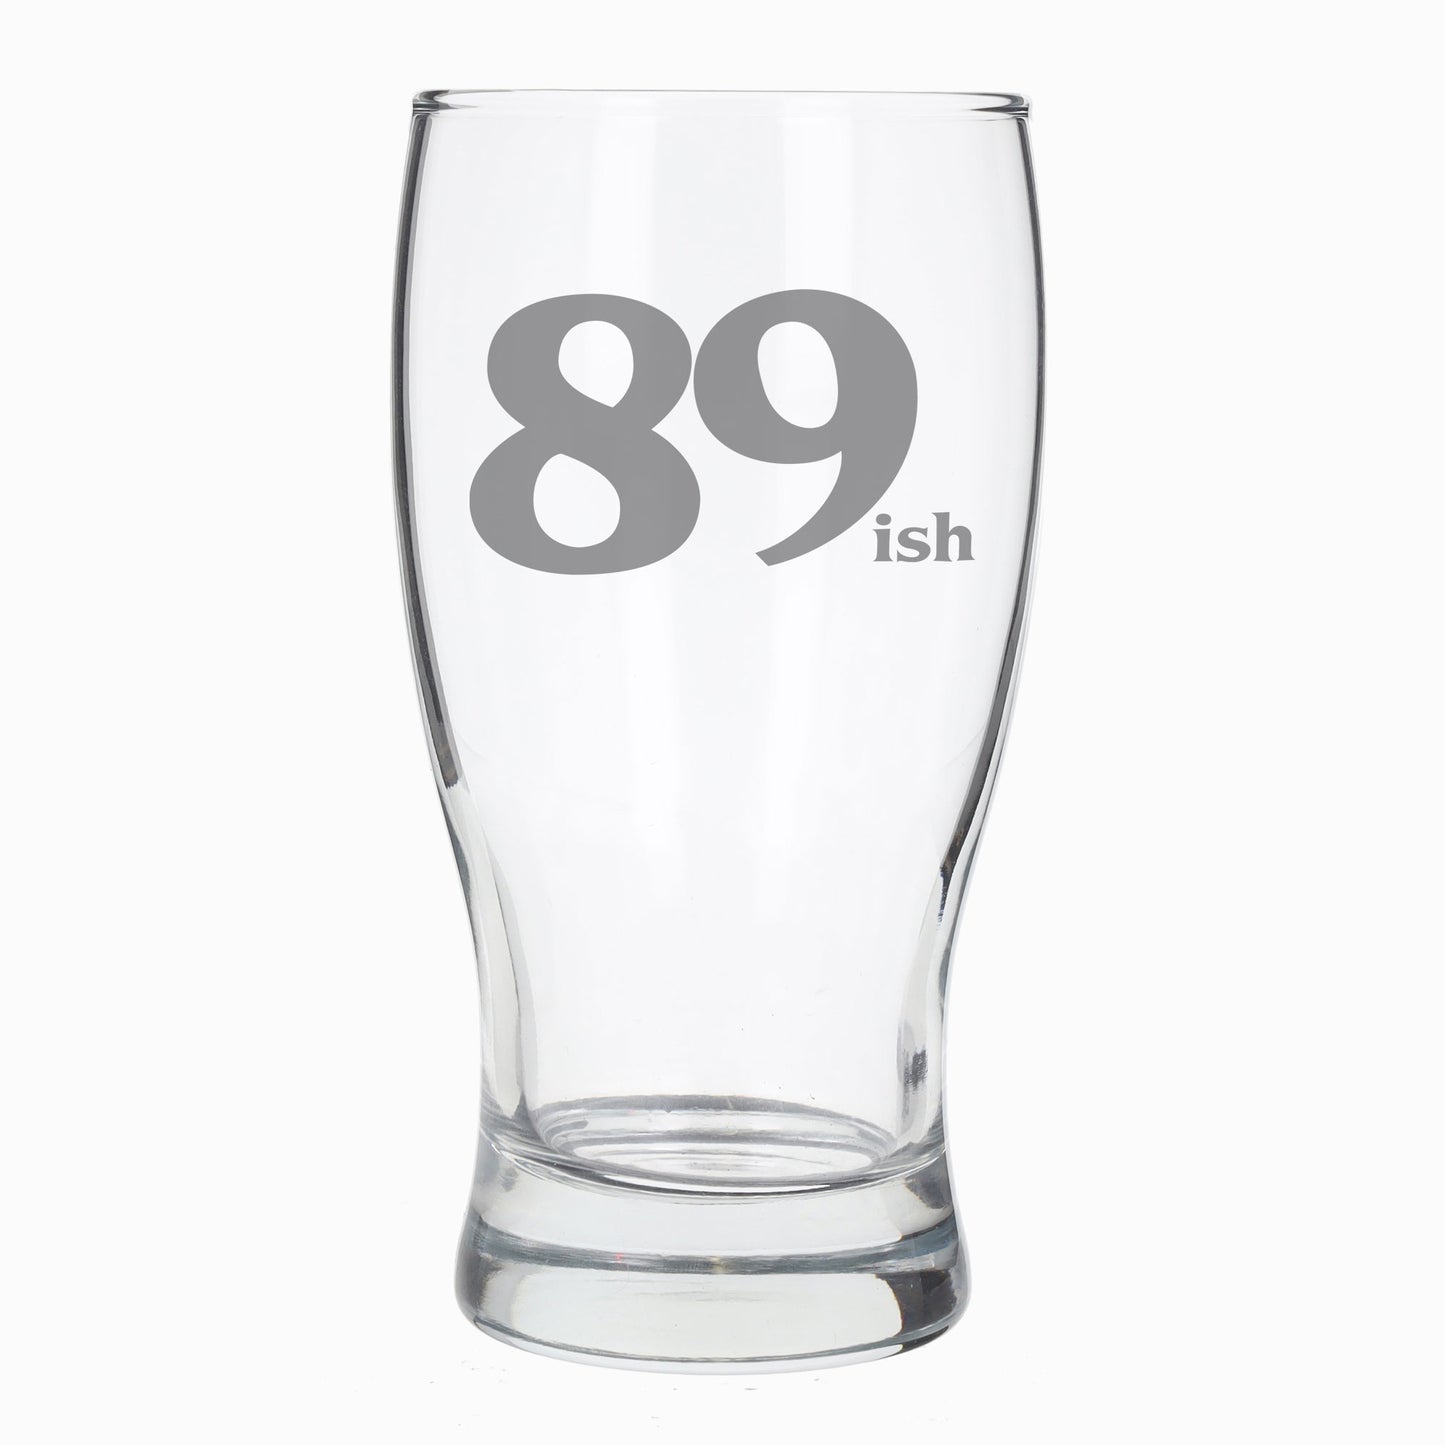 89ish Pint Glass and/or Coaster Set  - Always Looking Good - Pint Glass On Its Own  